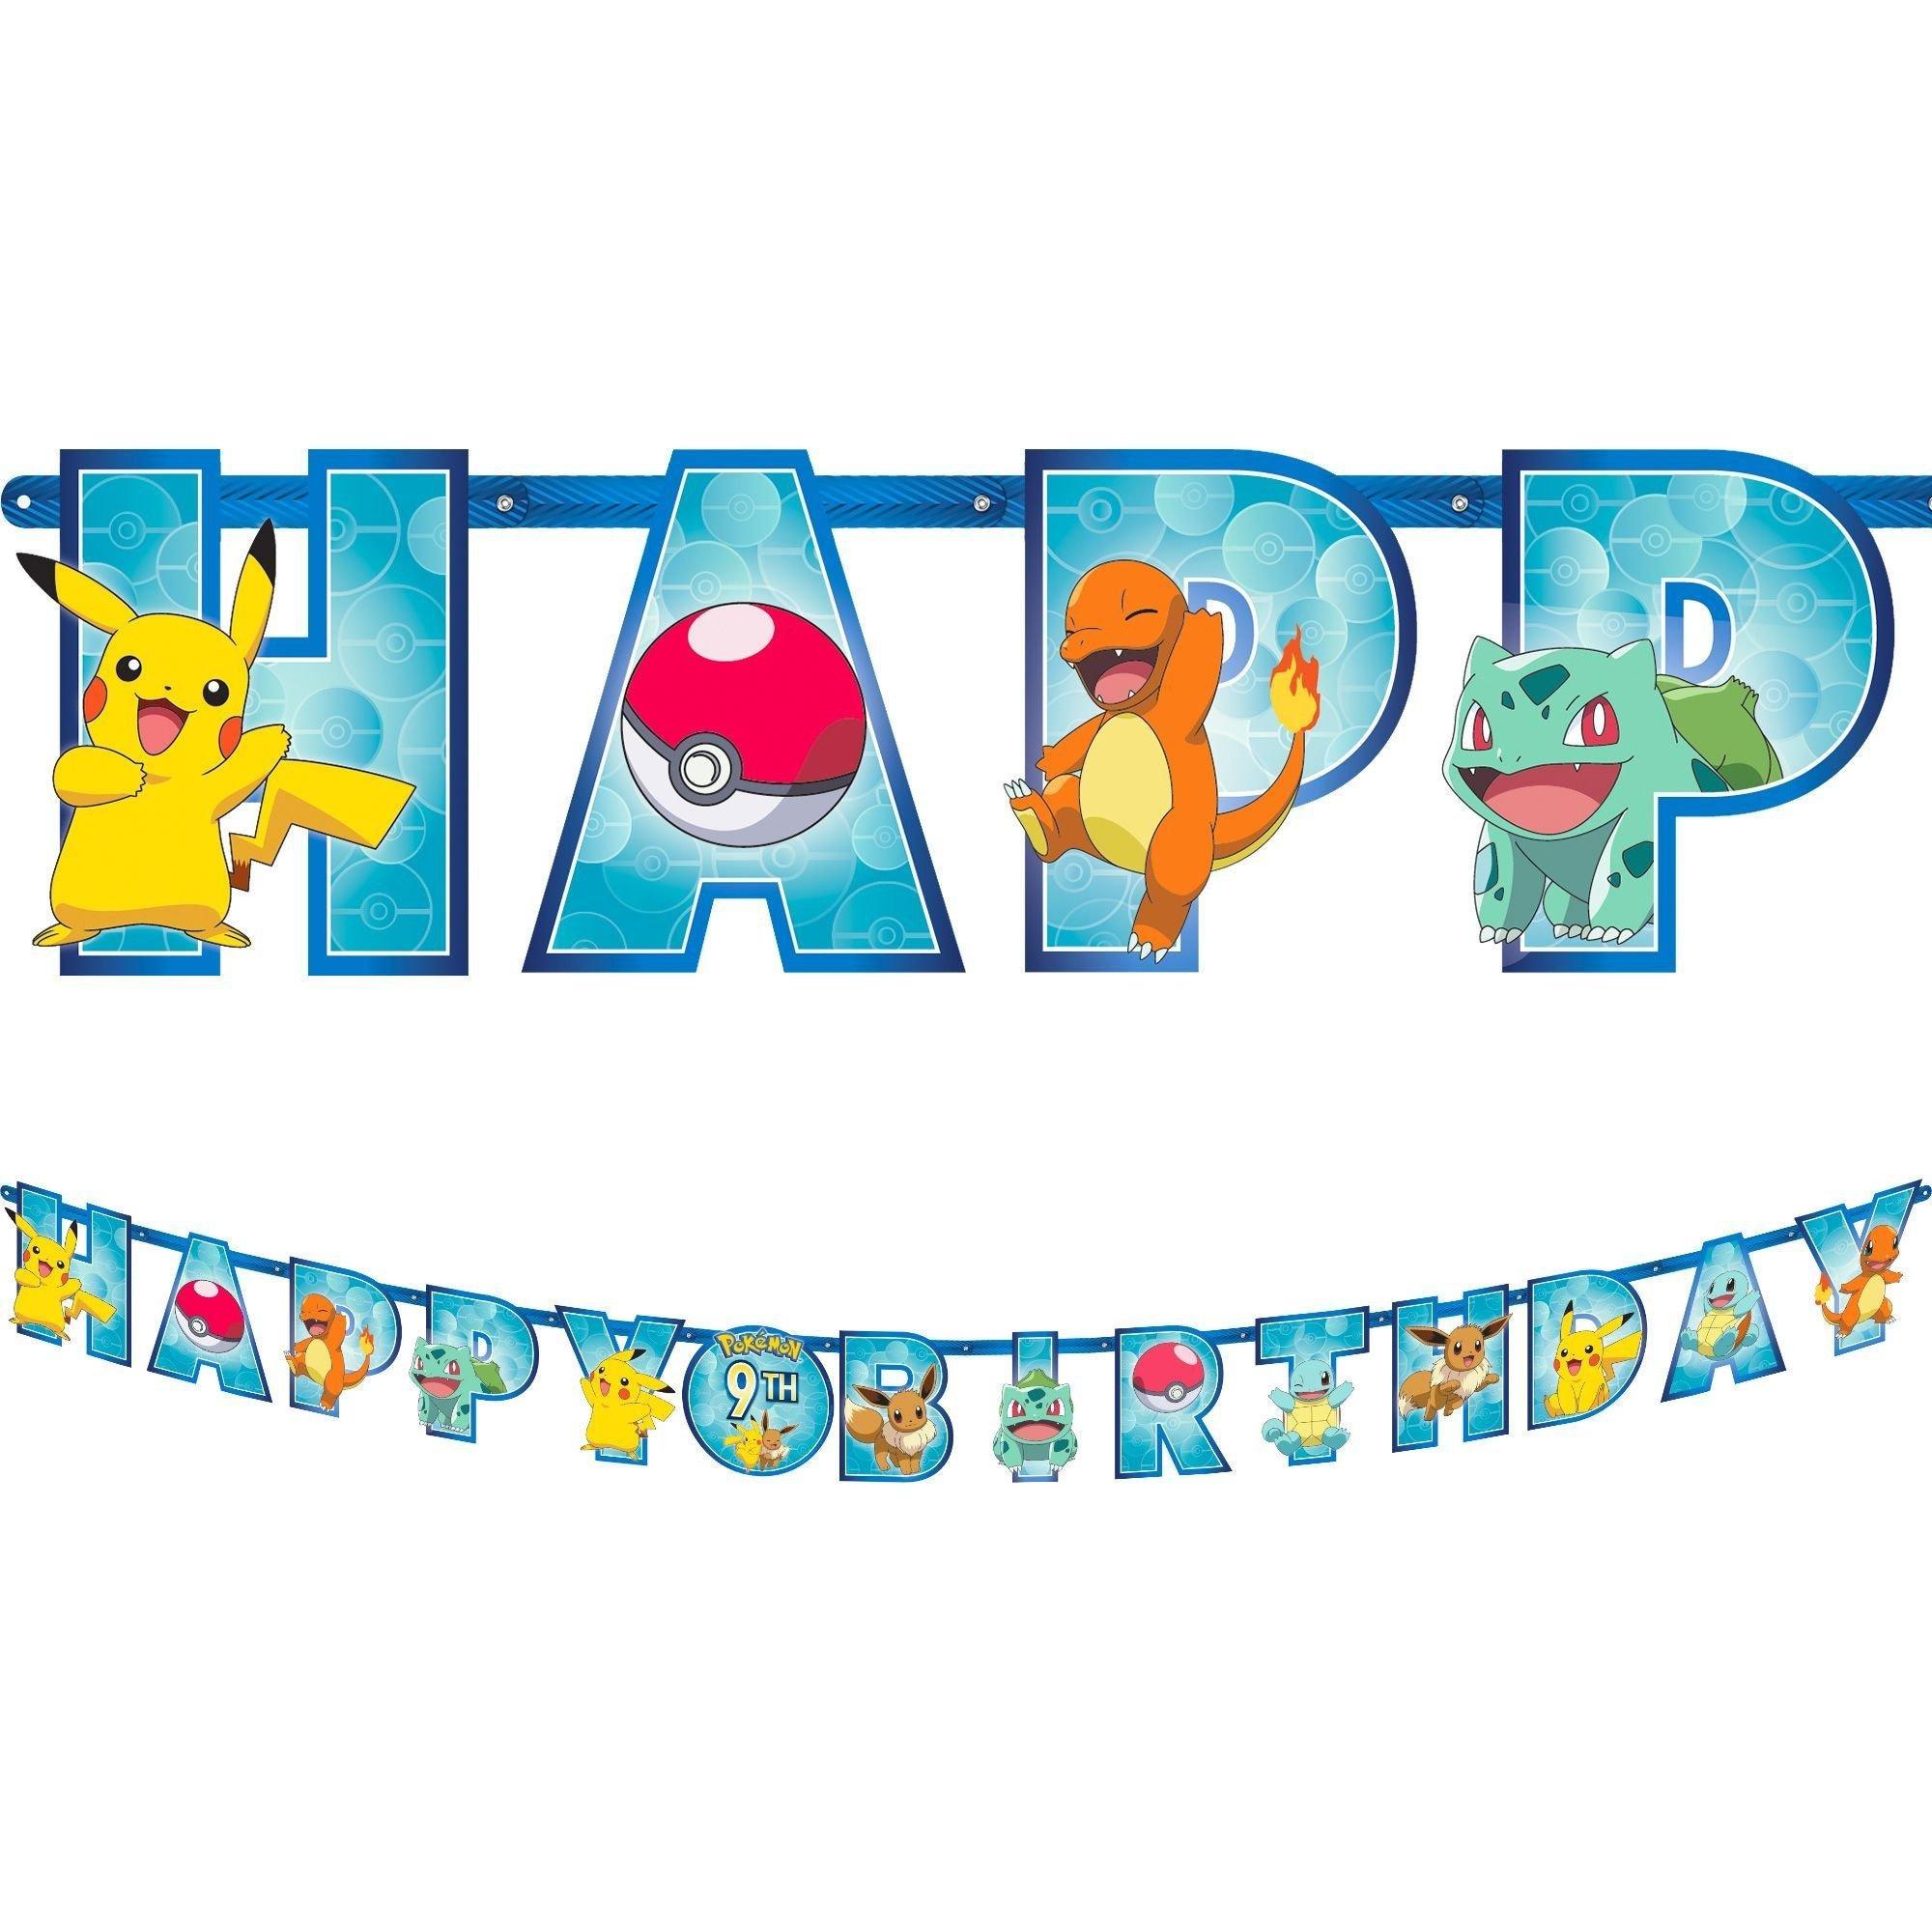 Pokemon Birthday Party Supplies Cake Decorating Pikachu Theme Balloon  Banner Cake Stand Party Decoration Gift Toys For Girl Boy